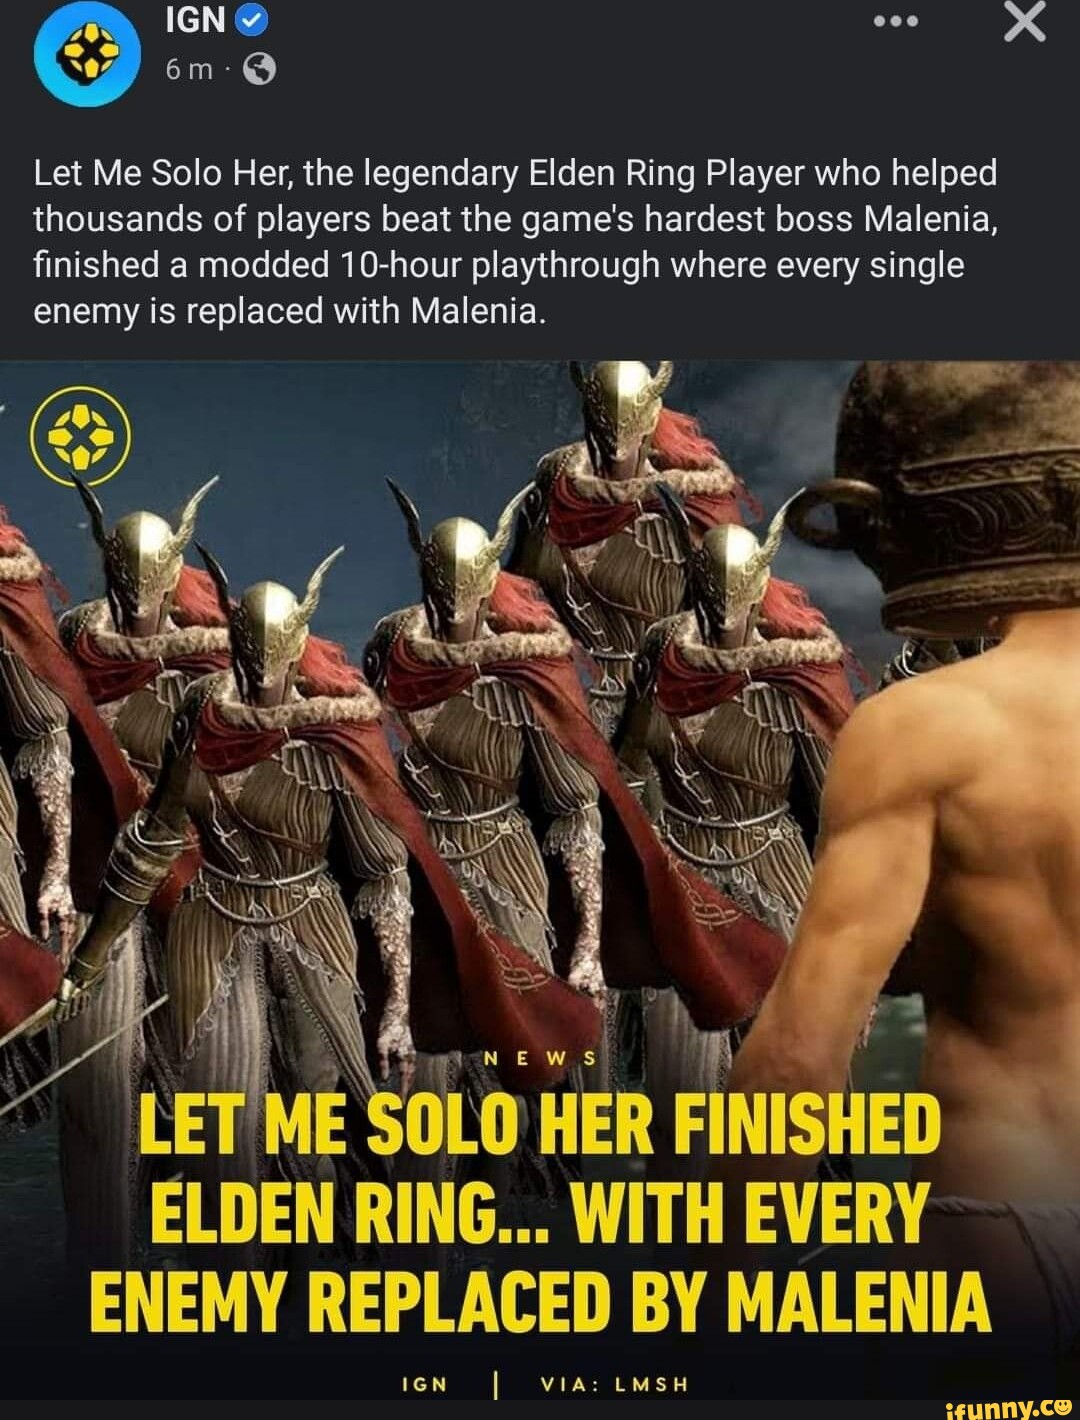 Elden Ring' Guide: How To Fight As The Legendary Player 'Let Me